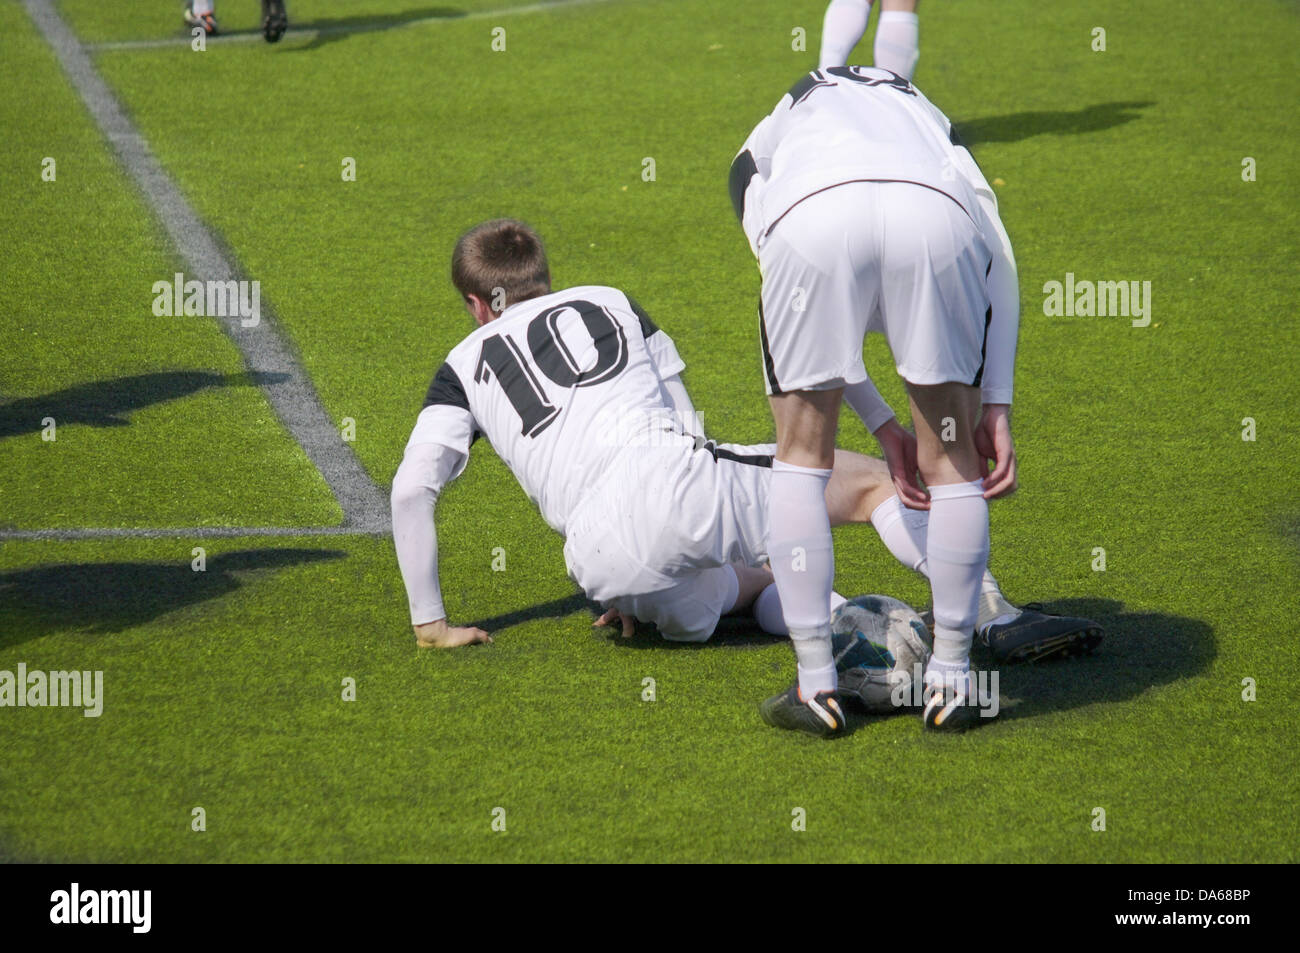 Soccer players collide while trying to score. Who says soccer is not a contact sport? Stock Photo